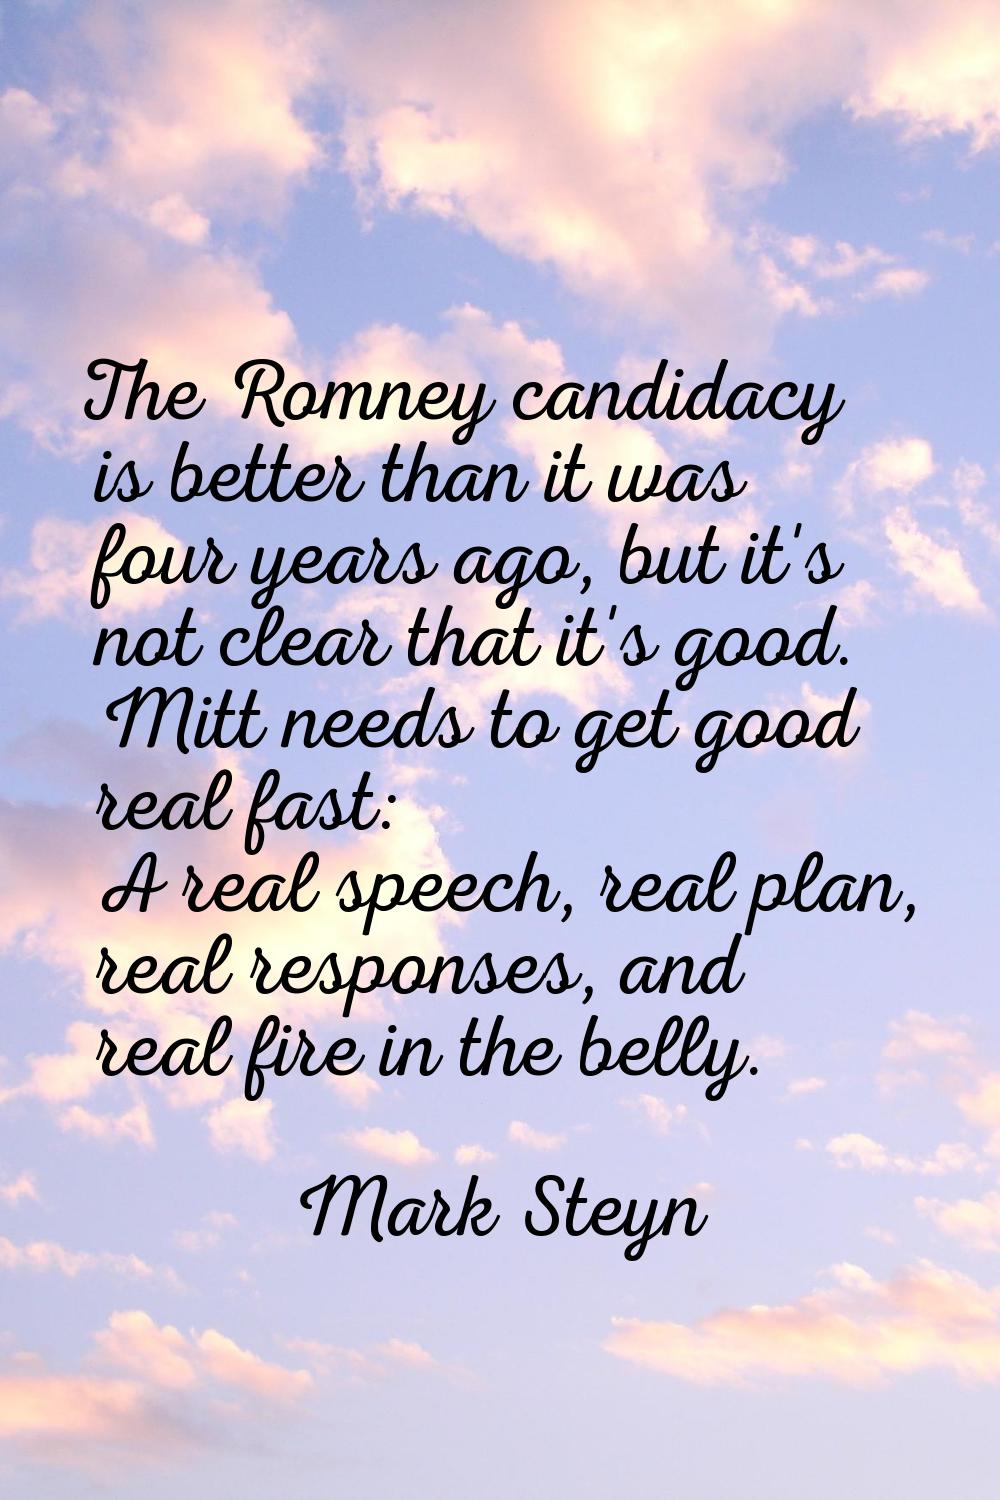 The Romney candidacy is better than it was four years ago, but it's not clear that it's good. Mitt 